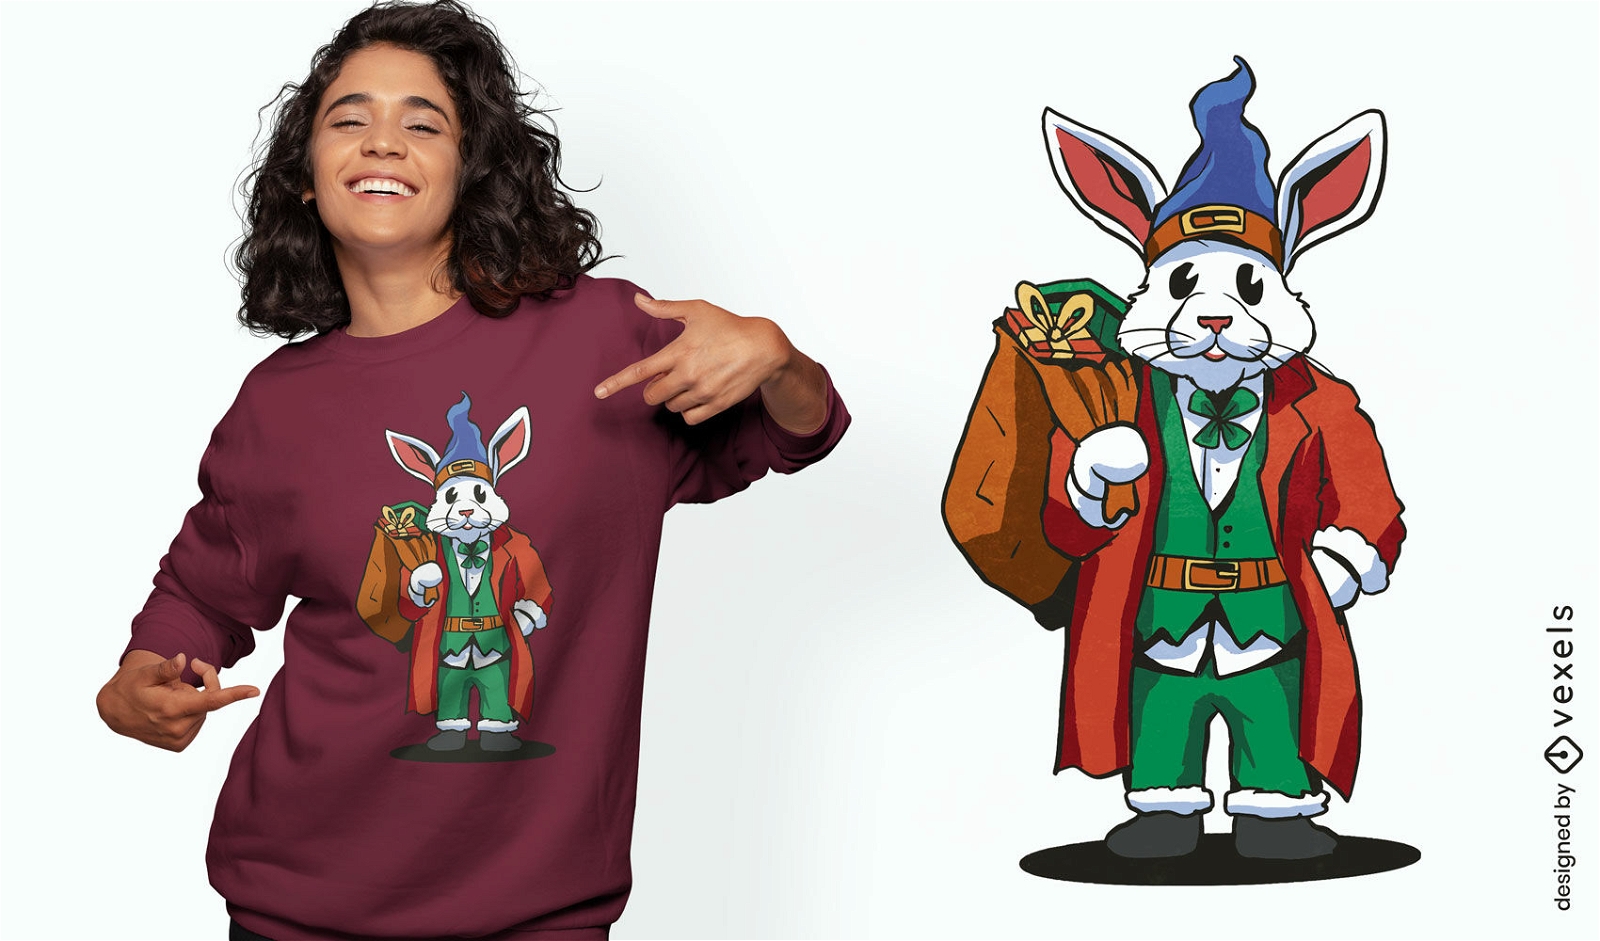 Easter bunny with gifts t-shirt design